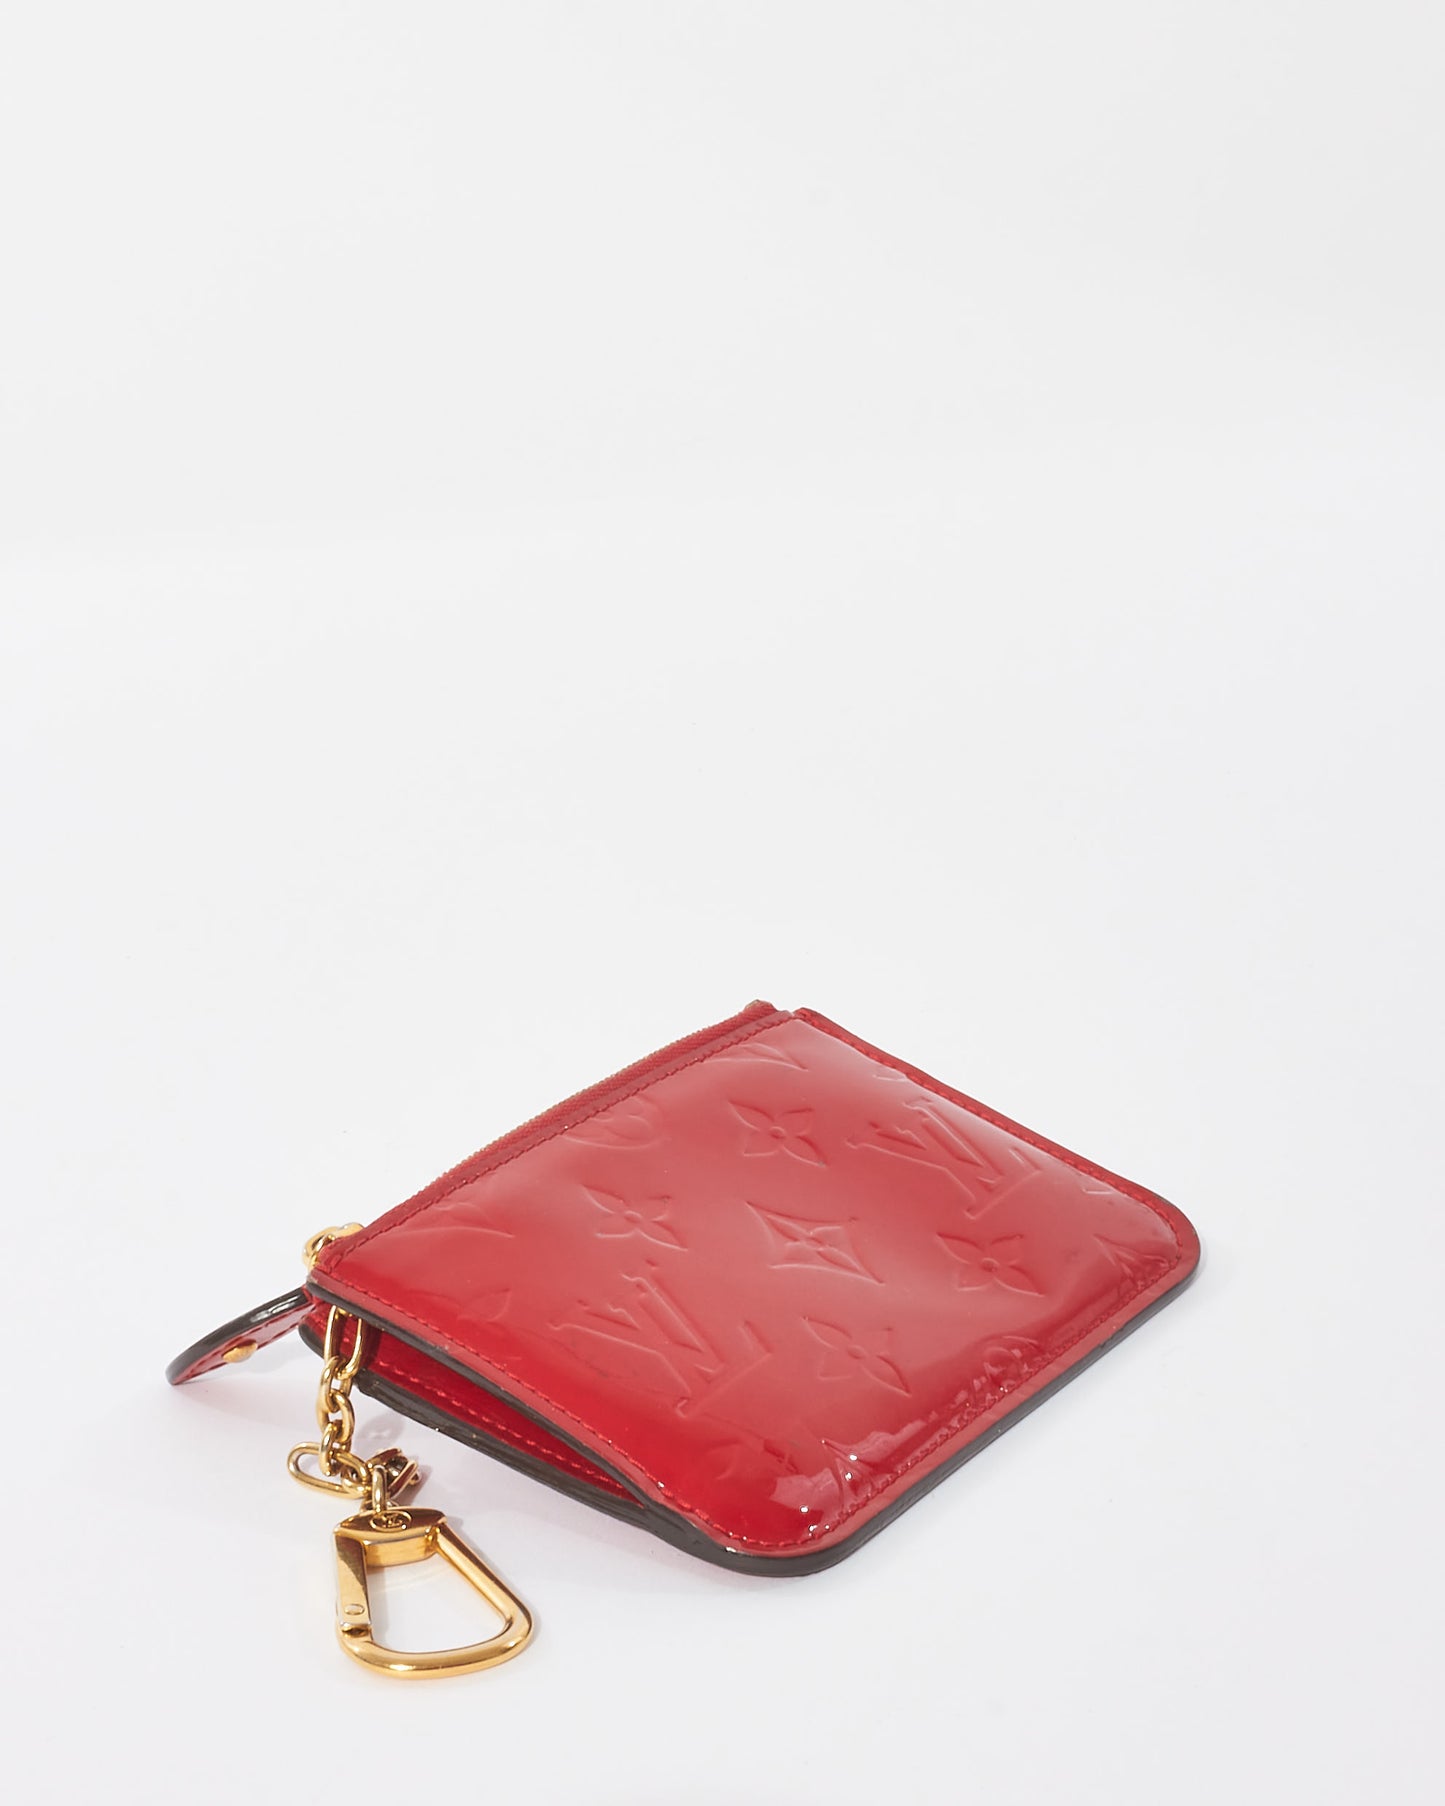 Louis Vuitton Red Monogram Vernis Leather Key Ring Pouch